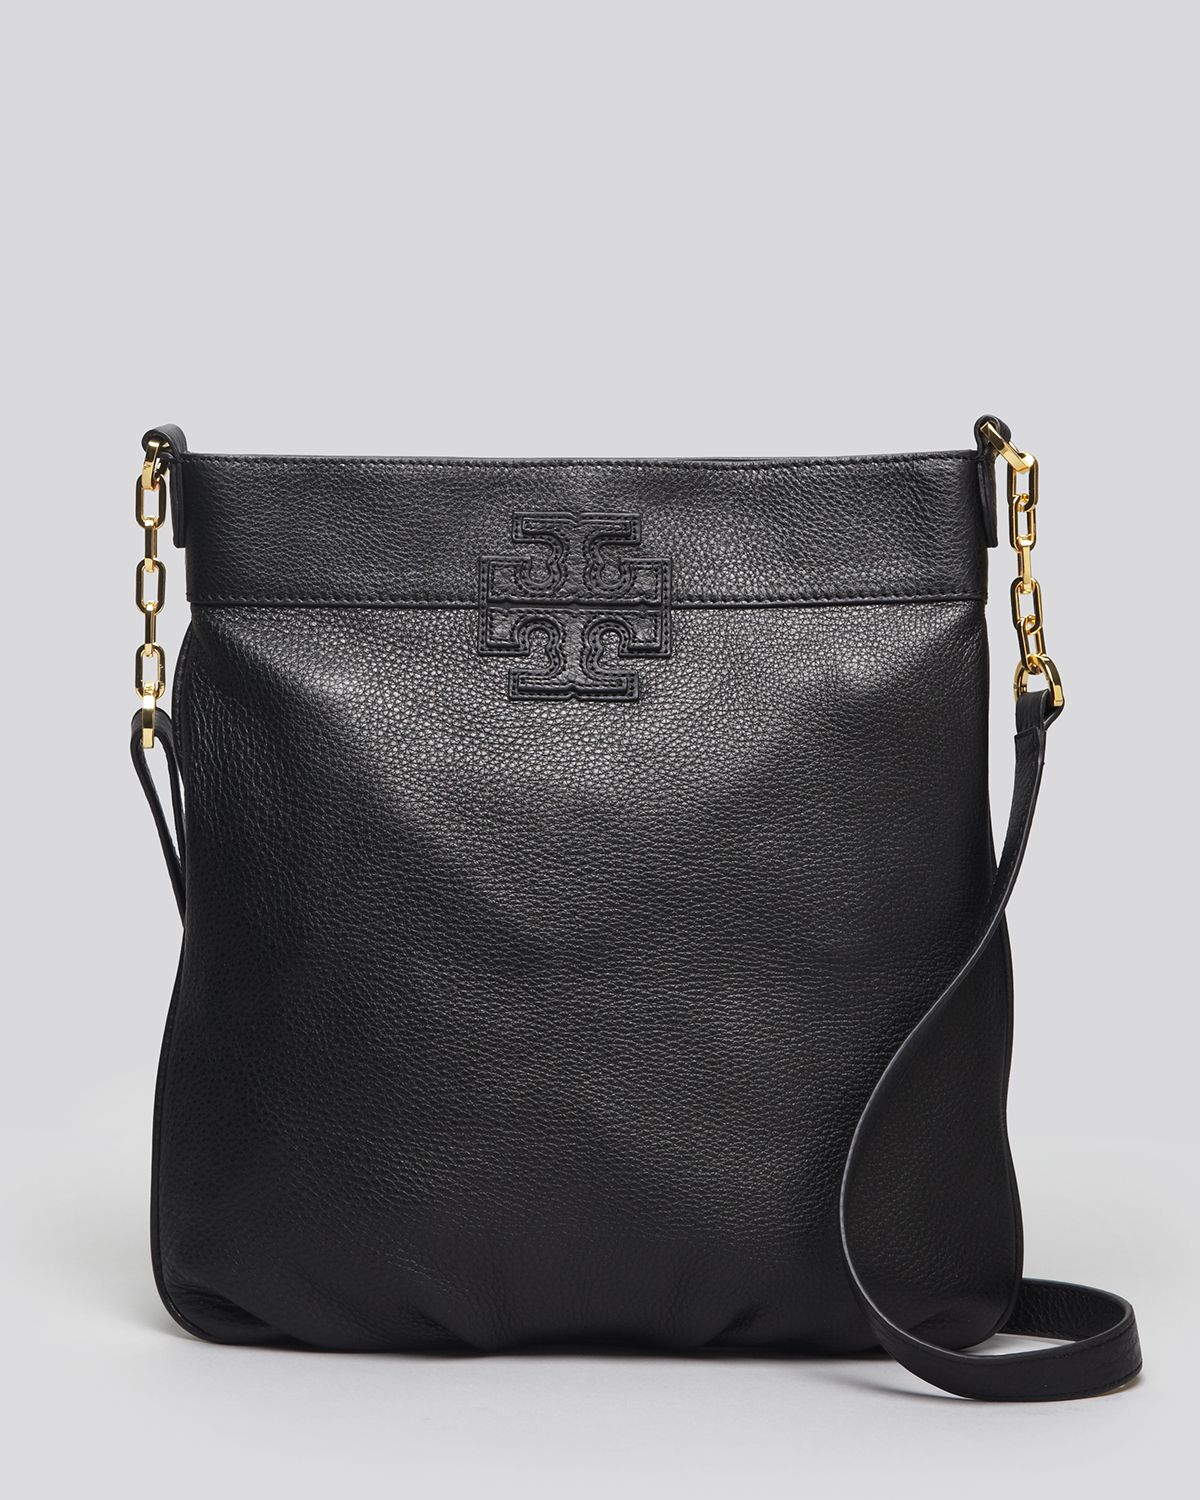 Tory Burch Crossbody Stacked T Book Bag in Black | Lyst